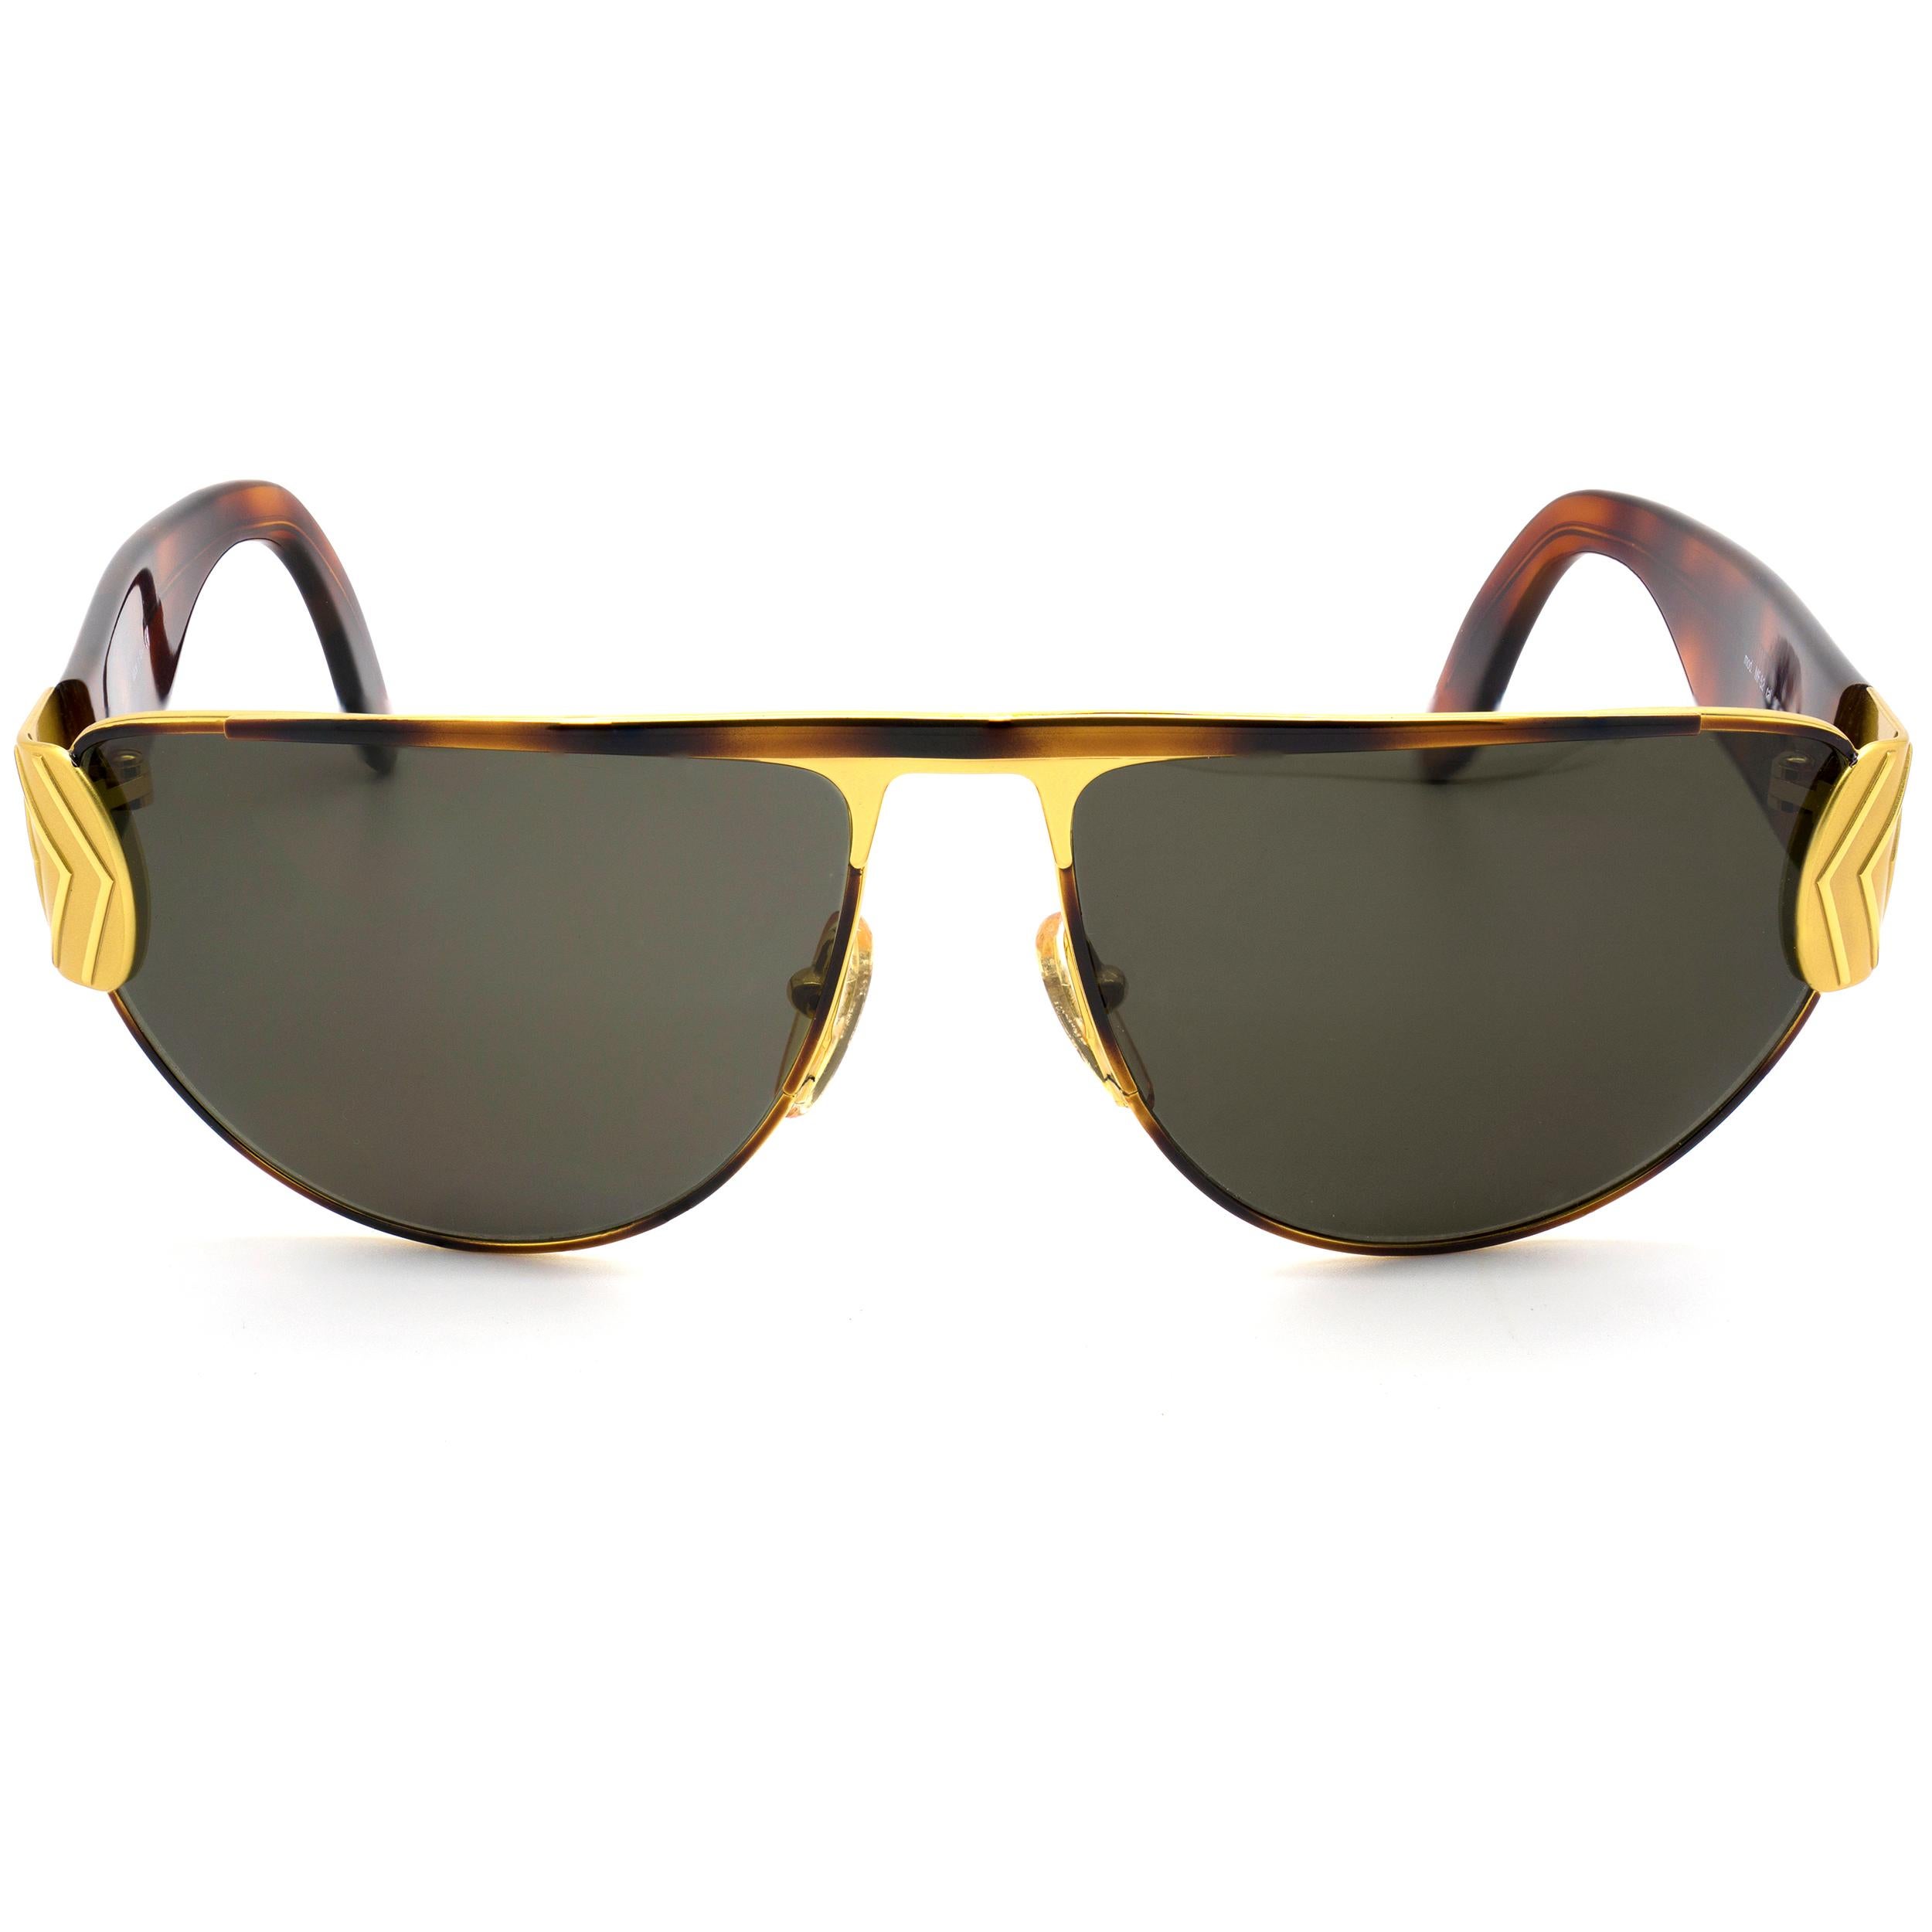 Prince Egon Von Furstenberg sunglasses, made in Italy in the 1980s. 

Before Diane, there was Egon. Egon was a prince from Switzerland and he married Diane and thus made Diane Von Furstenburg a princess. An acclaimed fashion designer, he was a